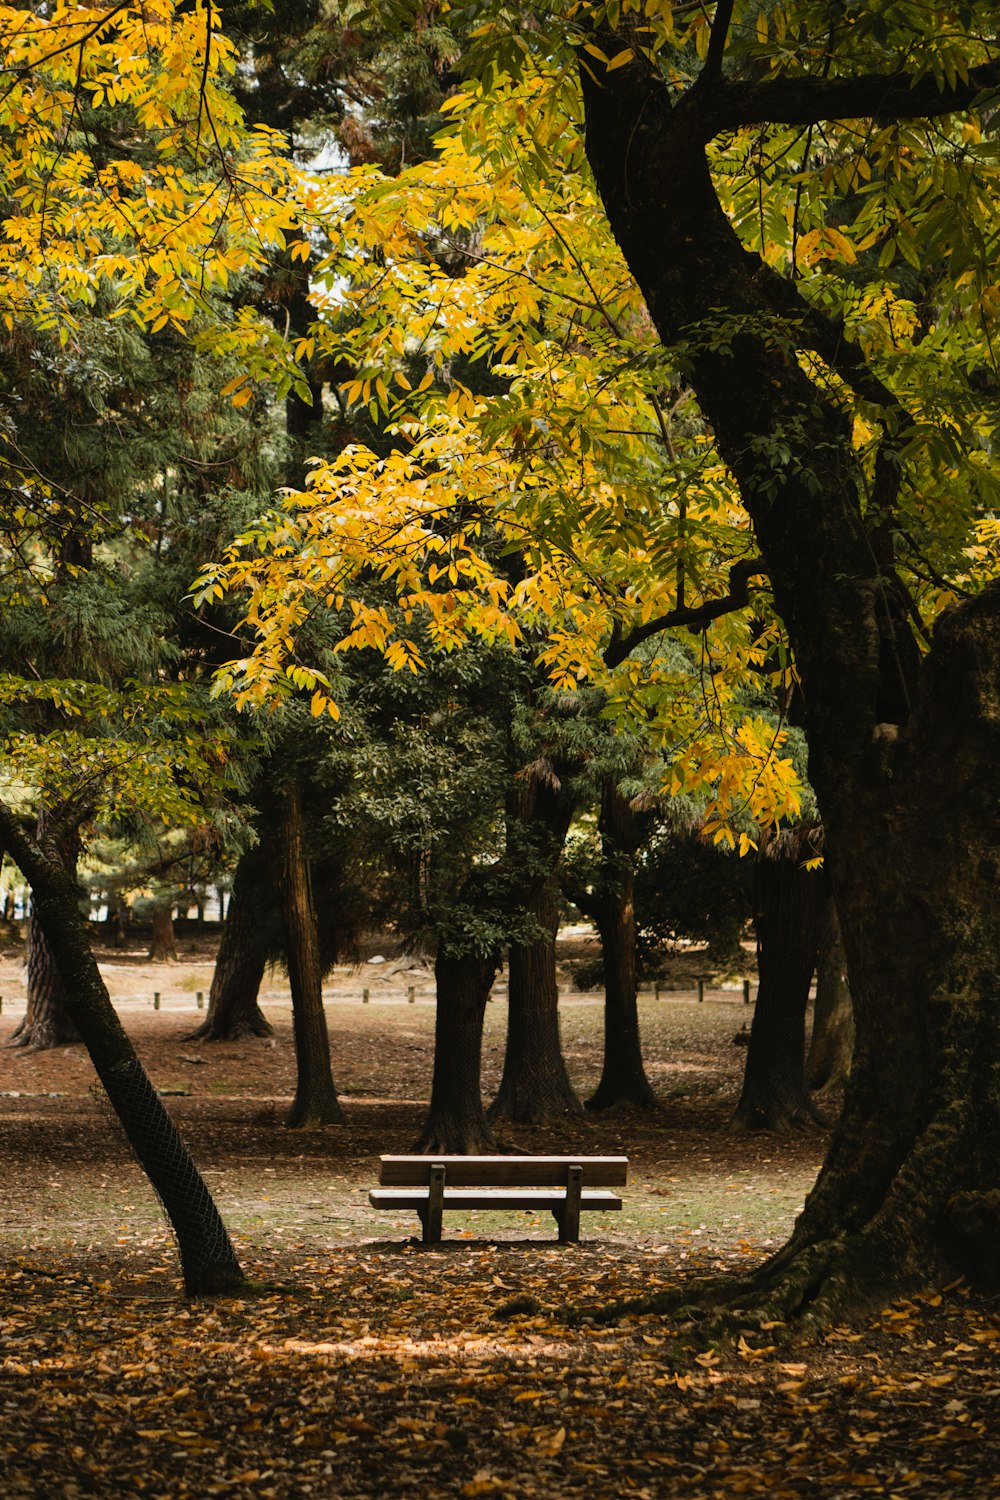 a park bench surrounded by trees with yellow leaves